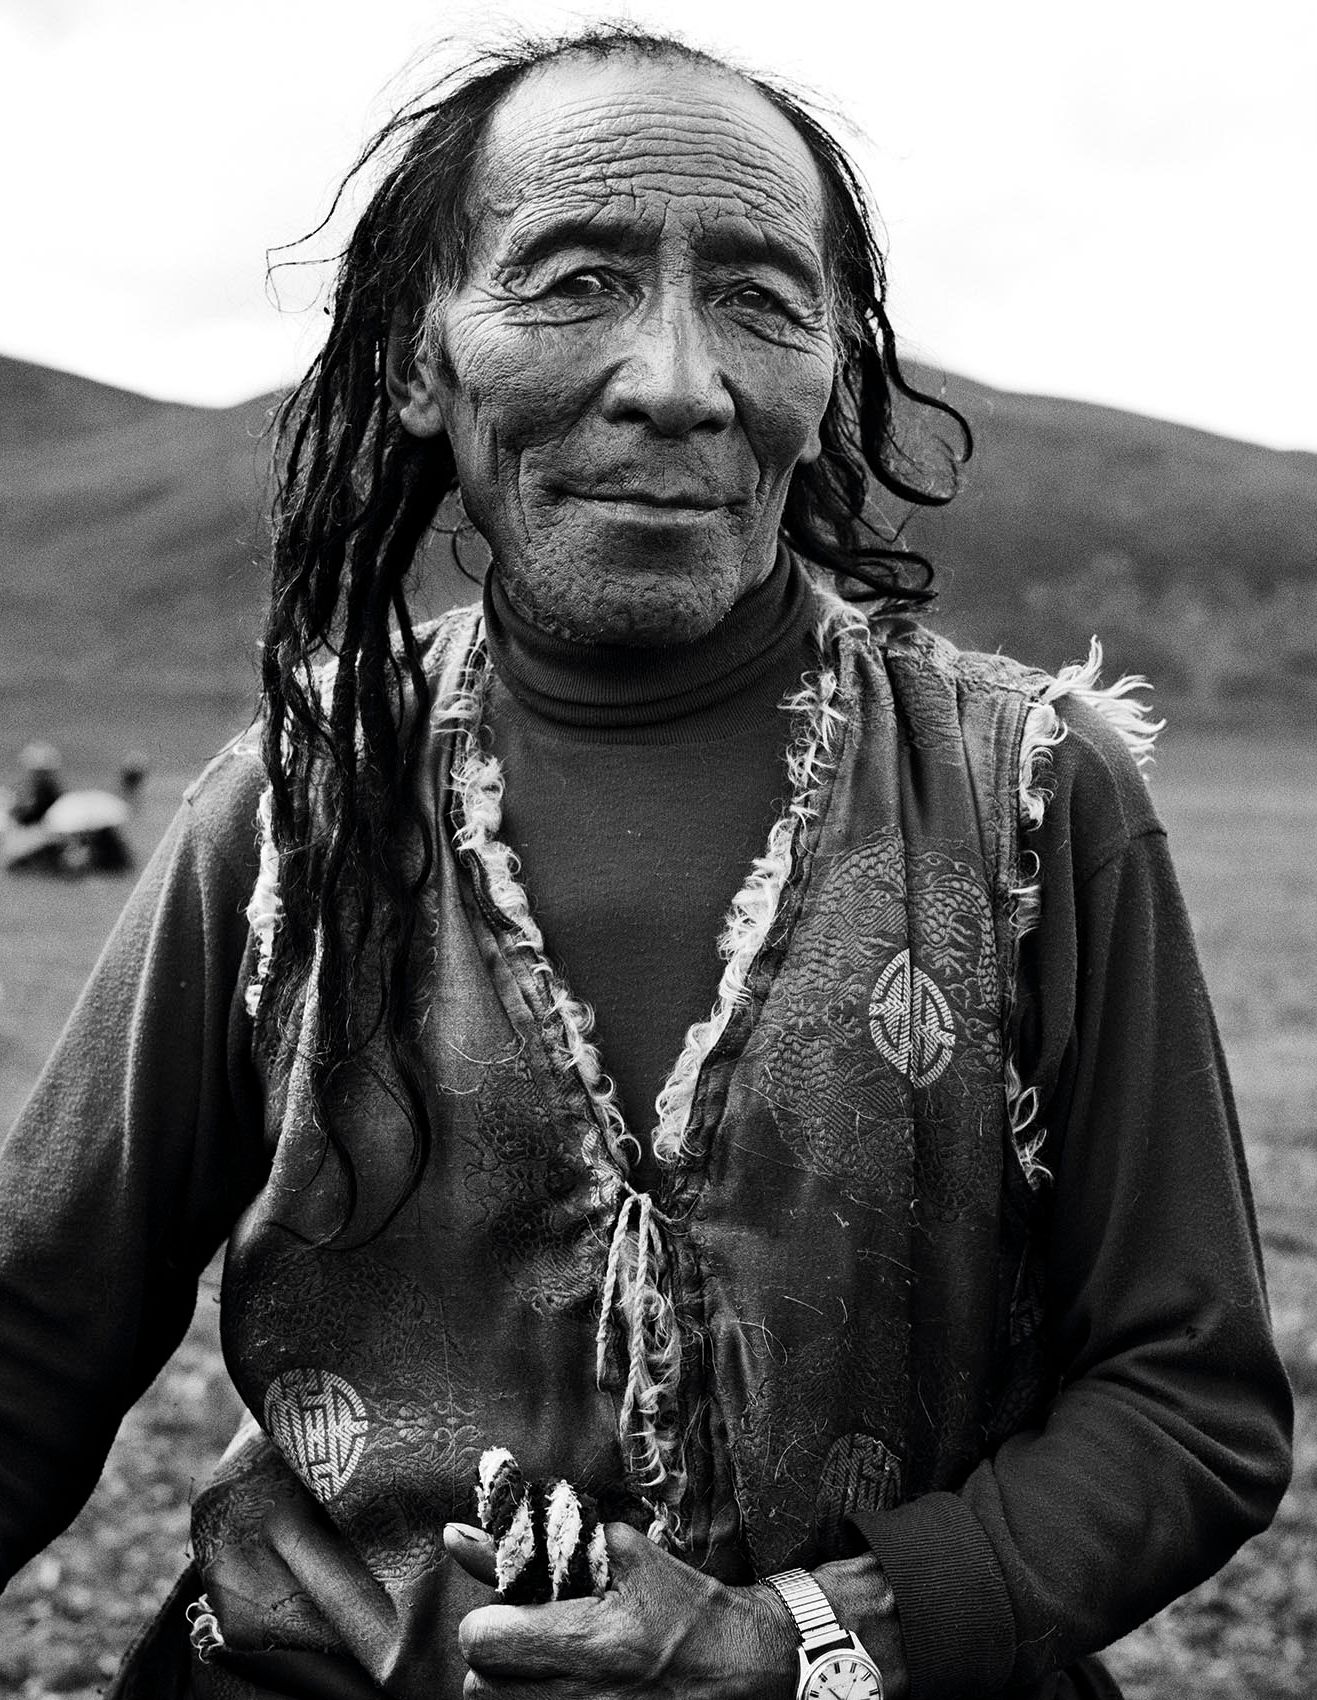 The Intimacy of Film: Tim Roodenrys Captures the Artisans of Tibet